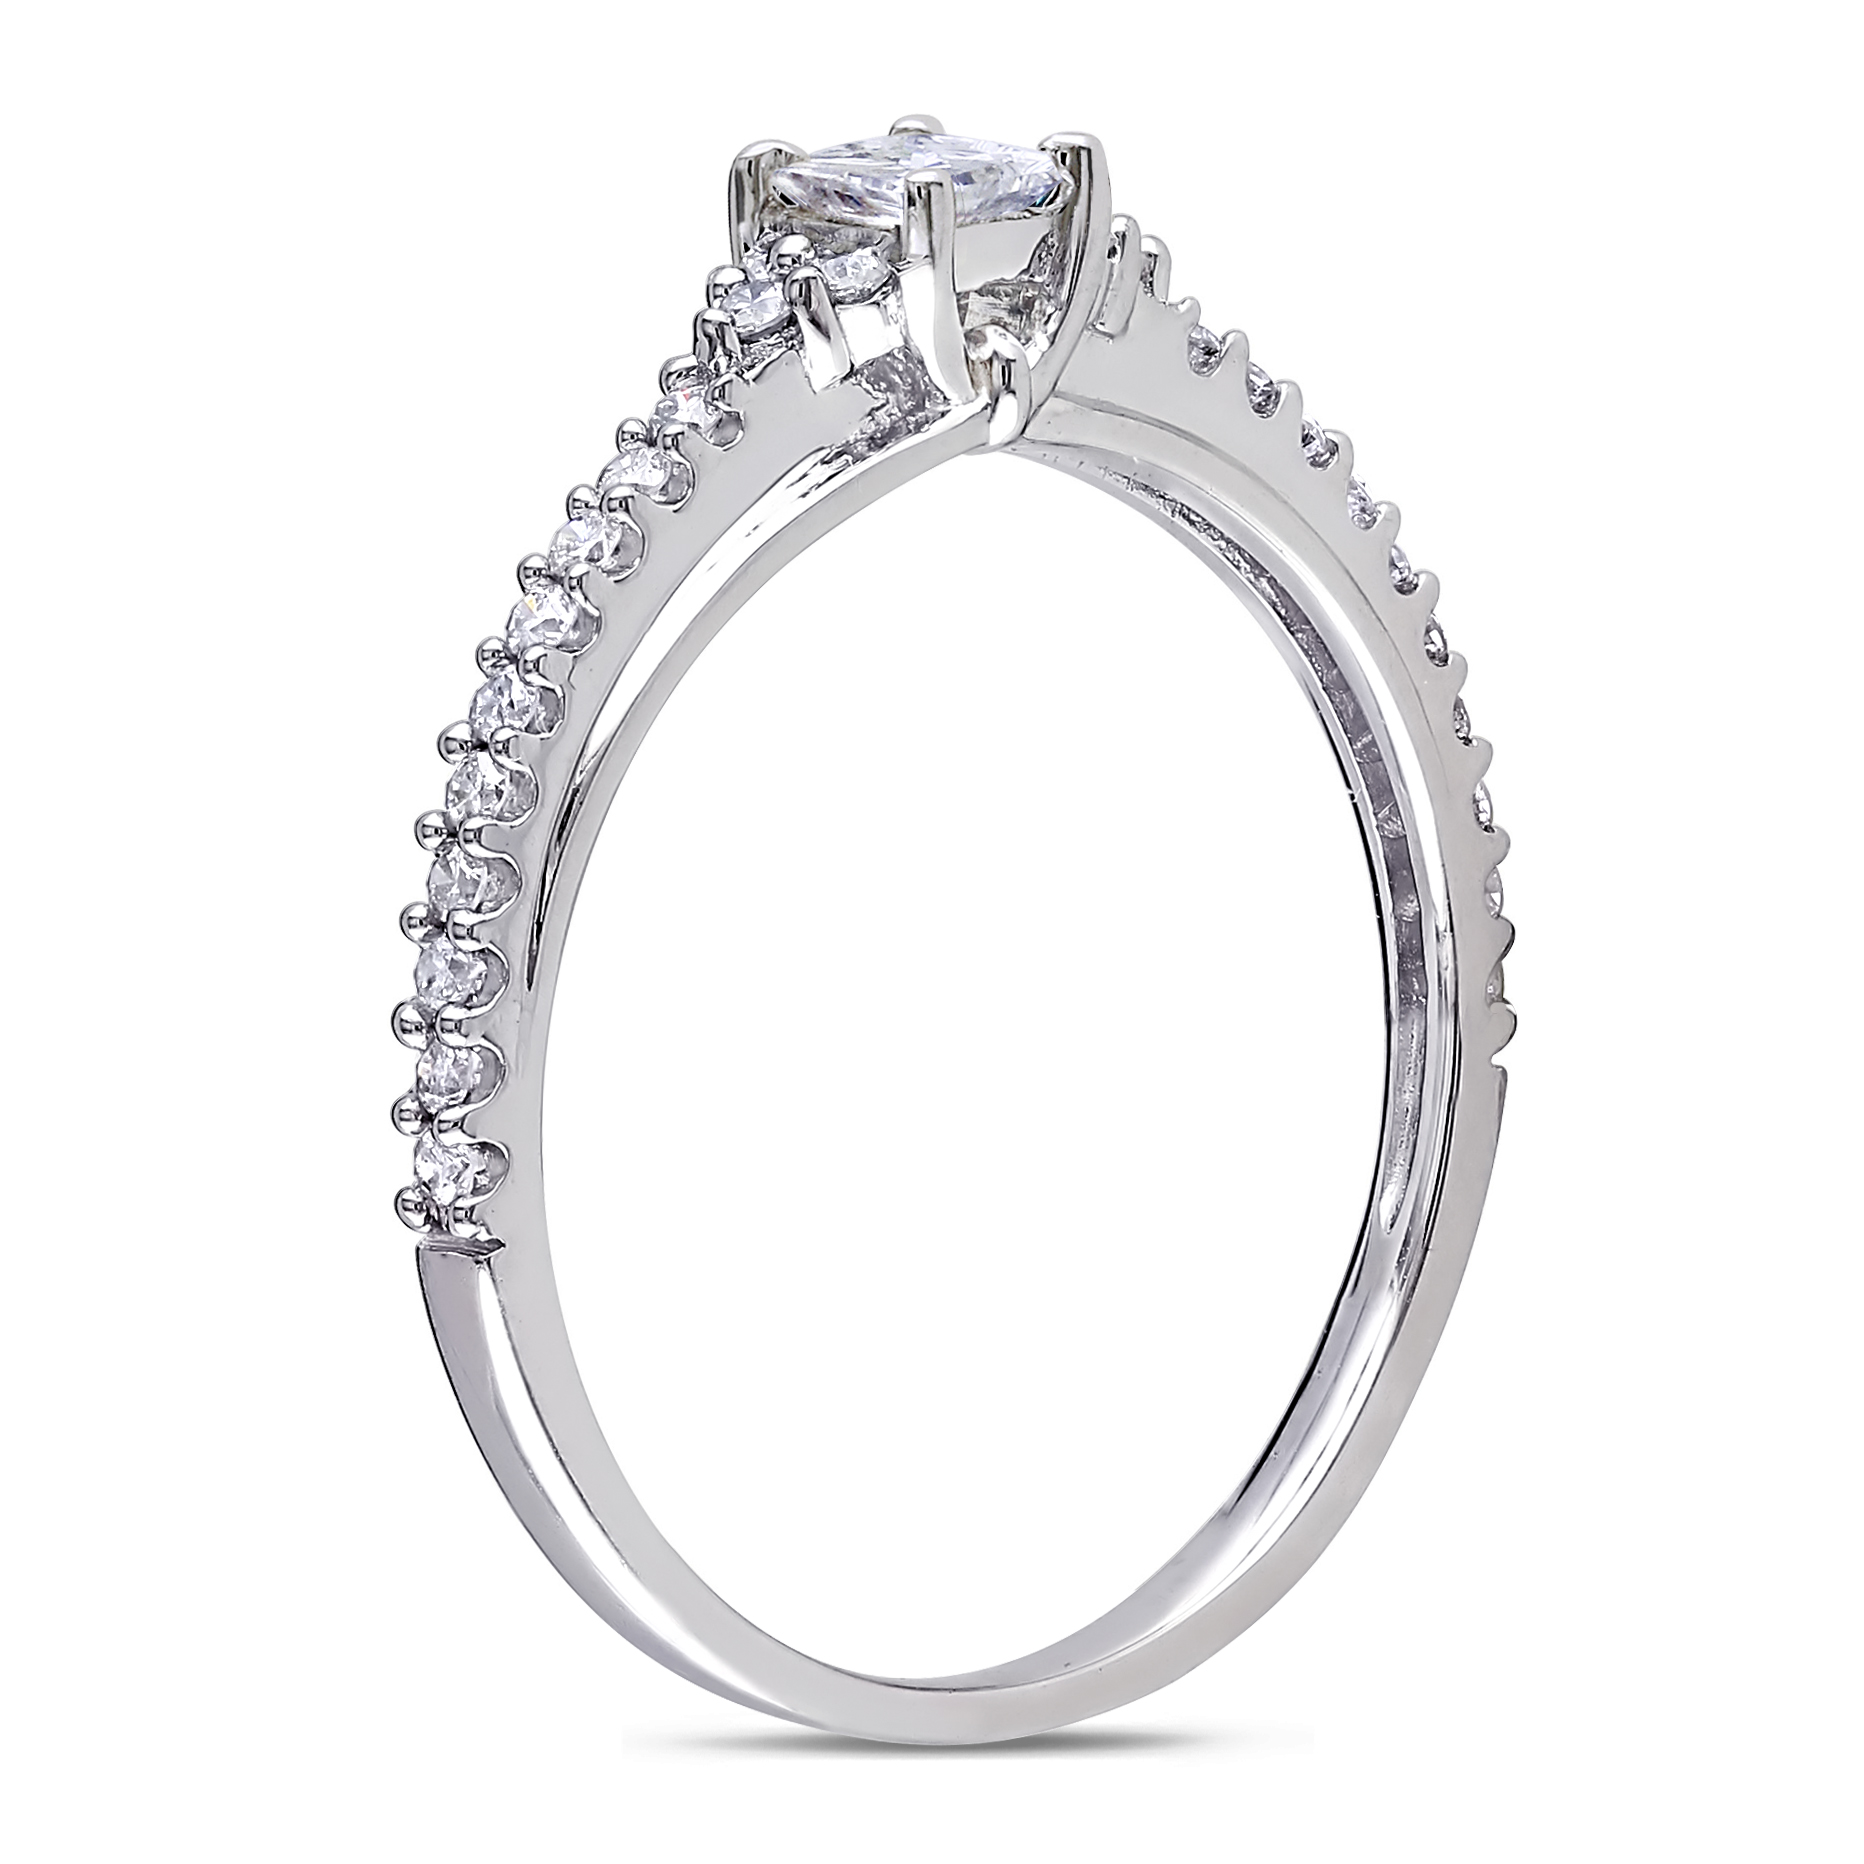 1/2 CT TW Princess Cut and Round Diamond Engagement Ring in 10k White Gold